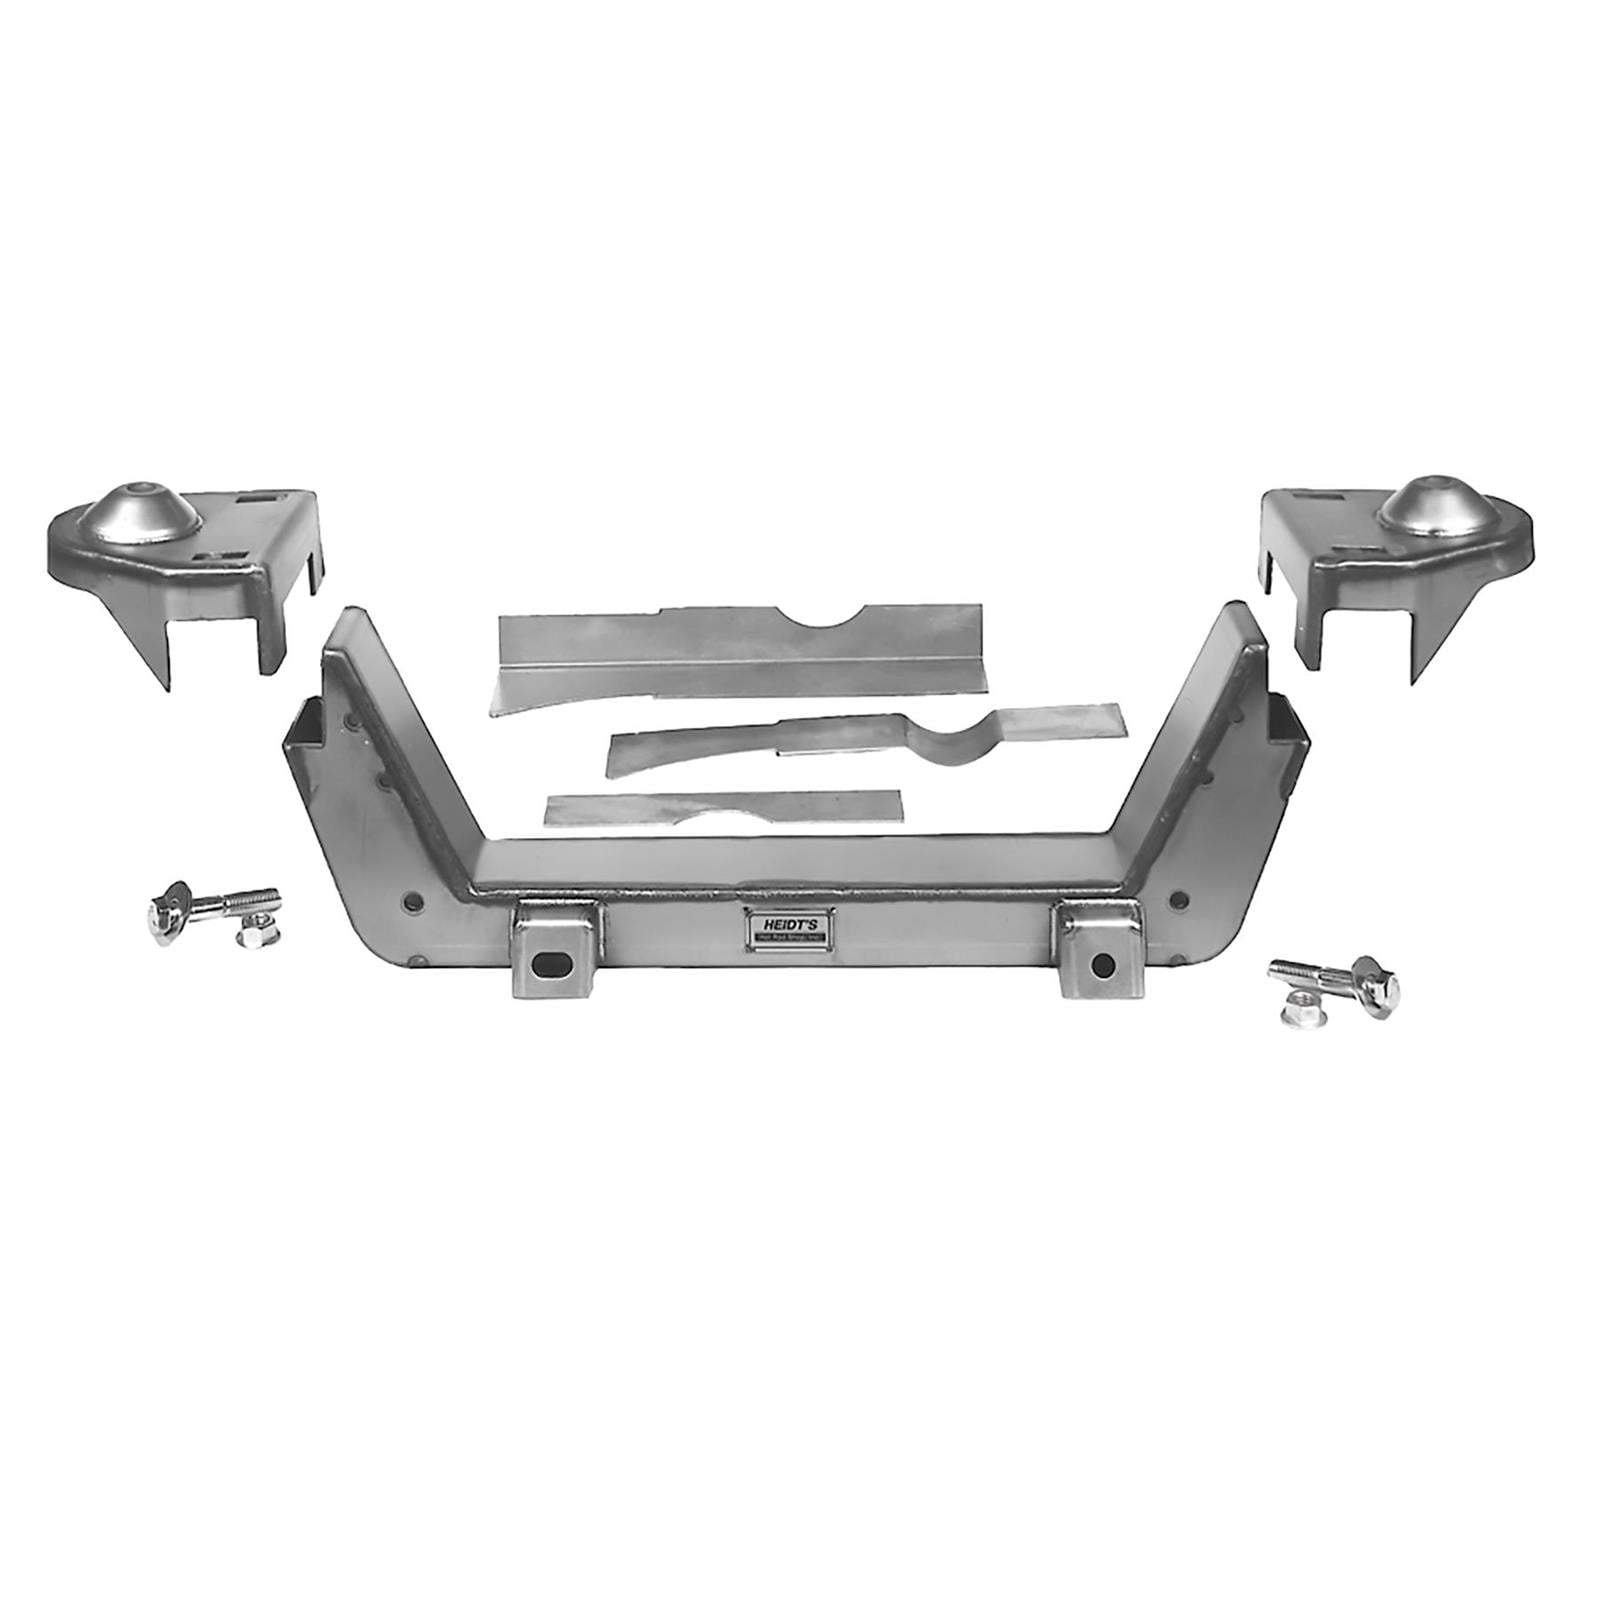 1964-70 Mustang/ 60-65 Falcon Frame Rail Chassis Boxing Plate Kit Mustang II IFS 